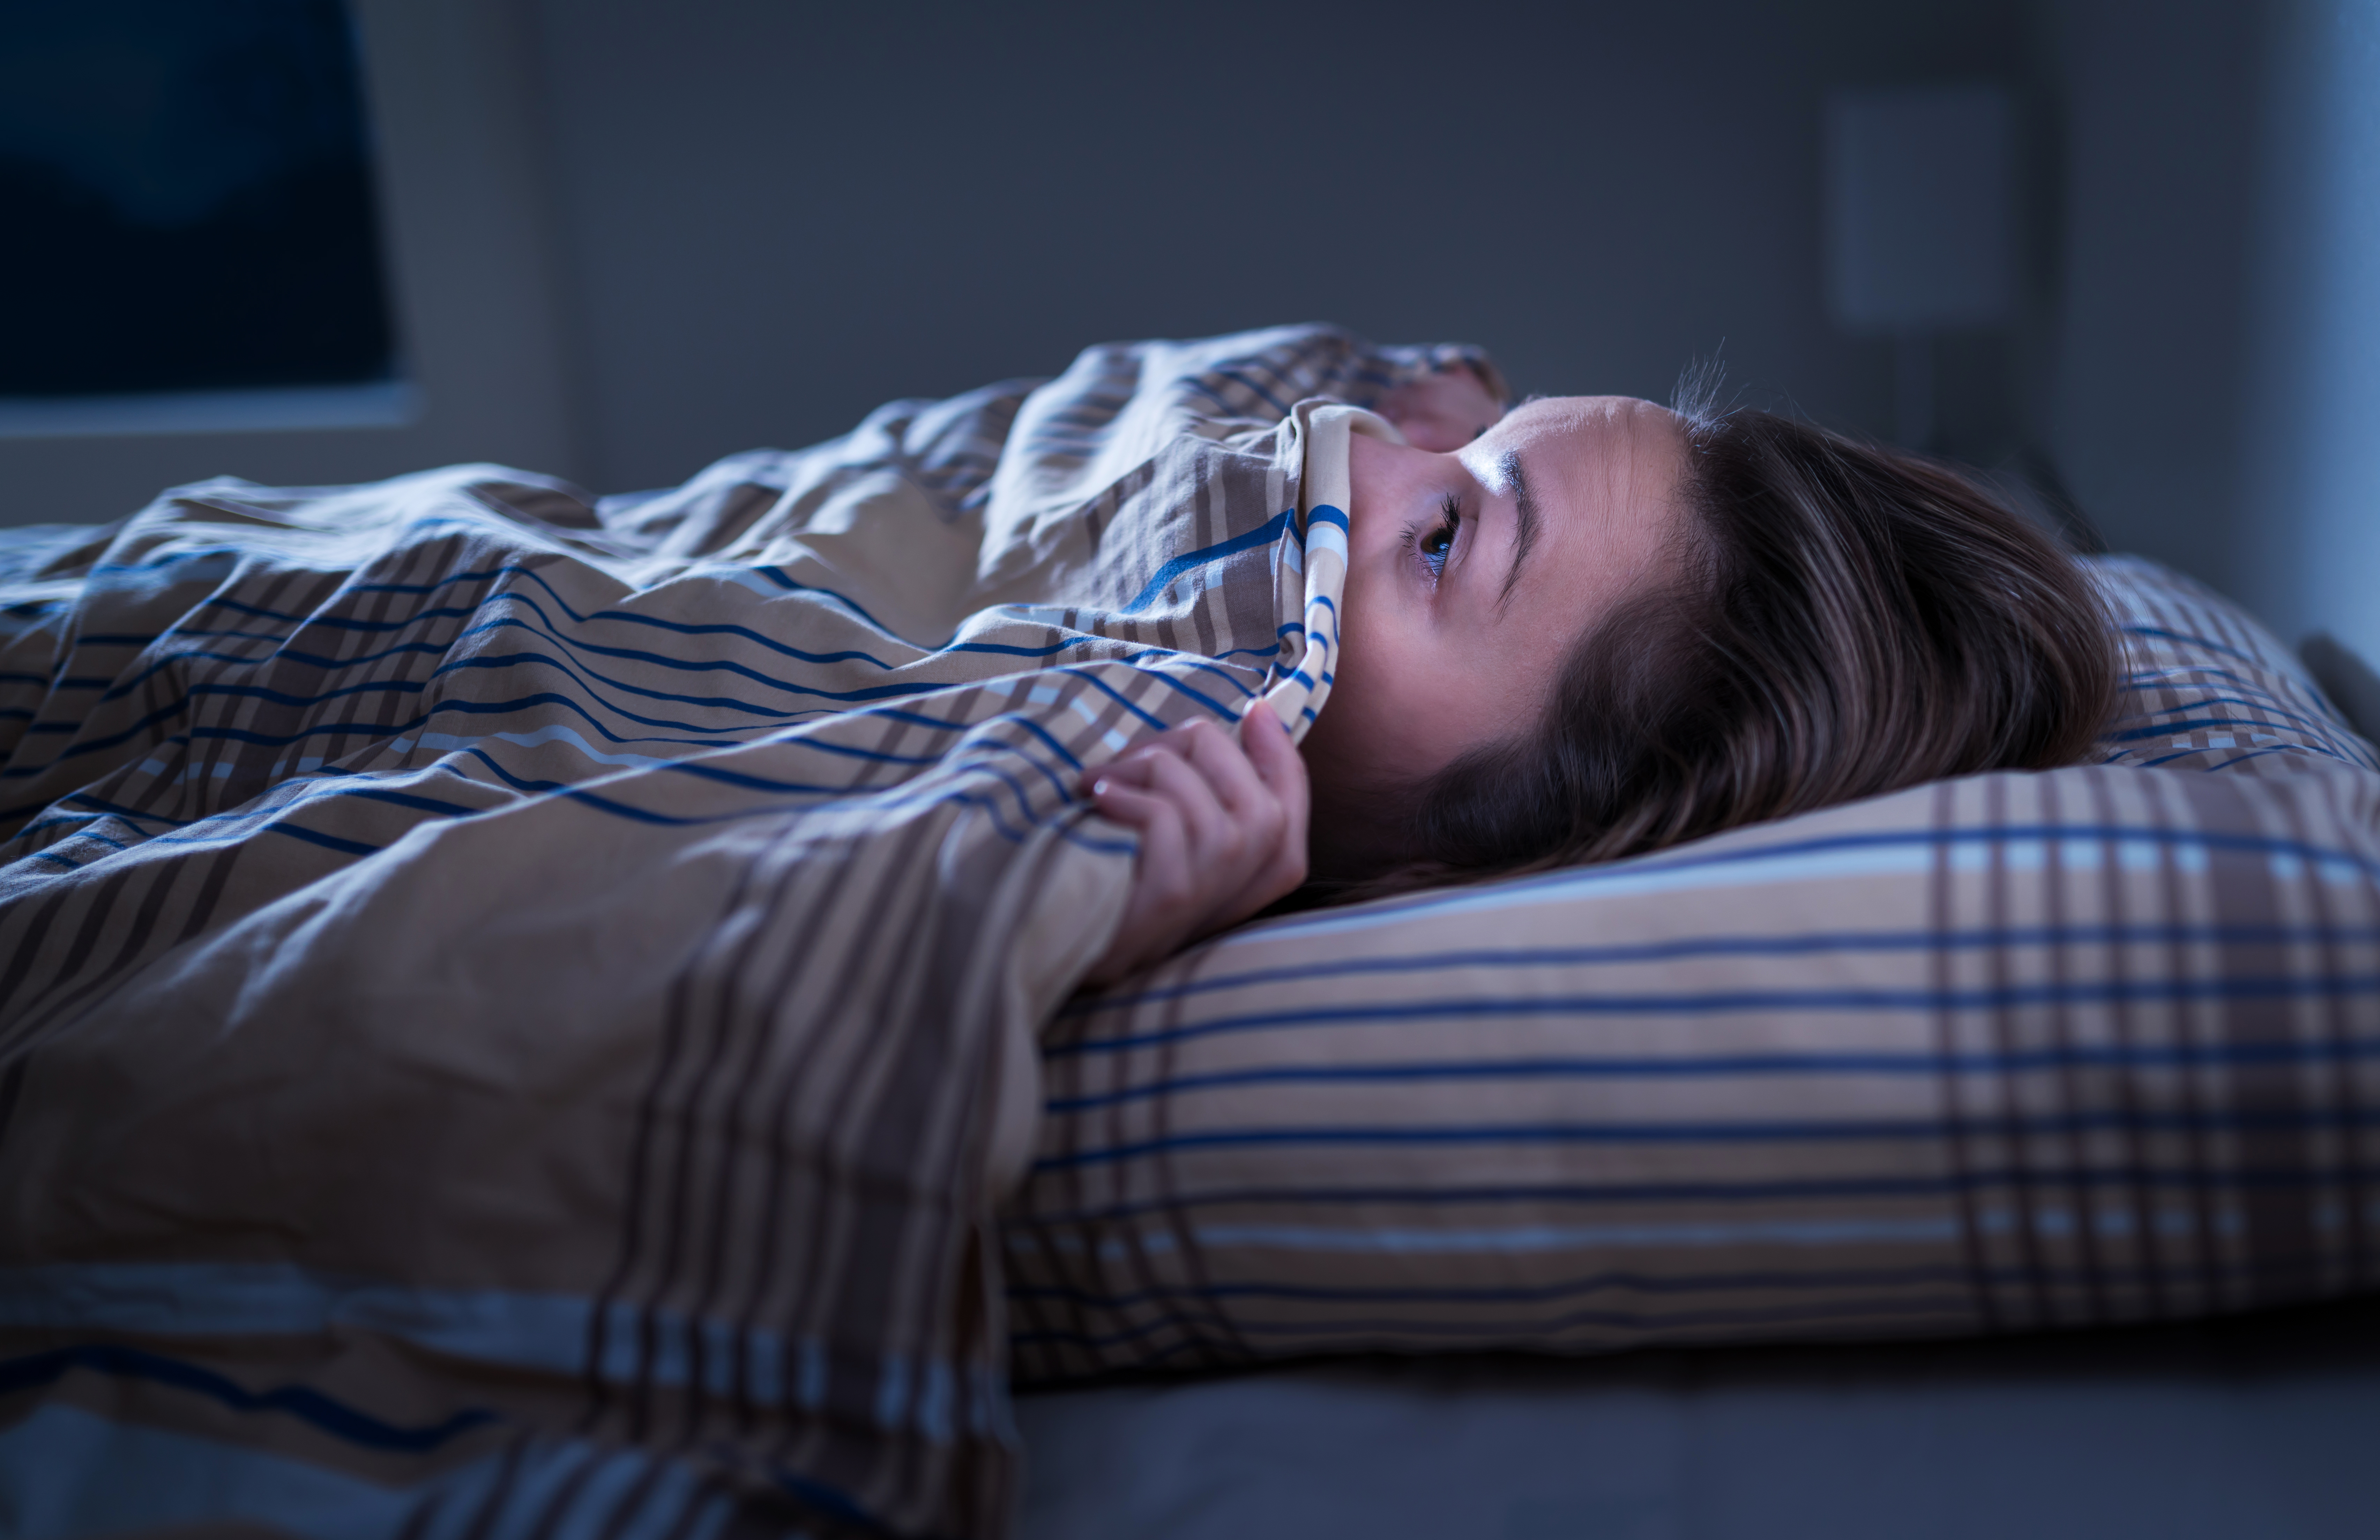 Scared woman hiding under blanket. Afraid of the dark. Unable to sleep after nightmare or bad dream. Awake in the middle of the night in bedroom at home. Monster under the bed. | Source: Getty Images